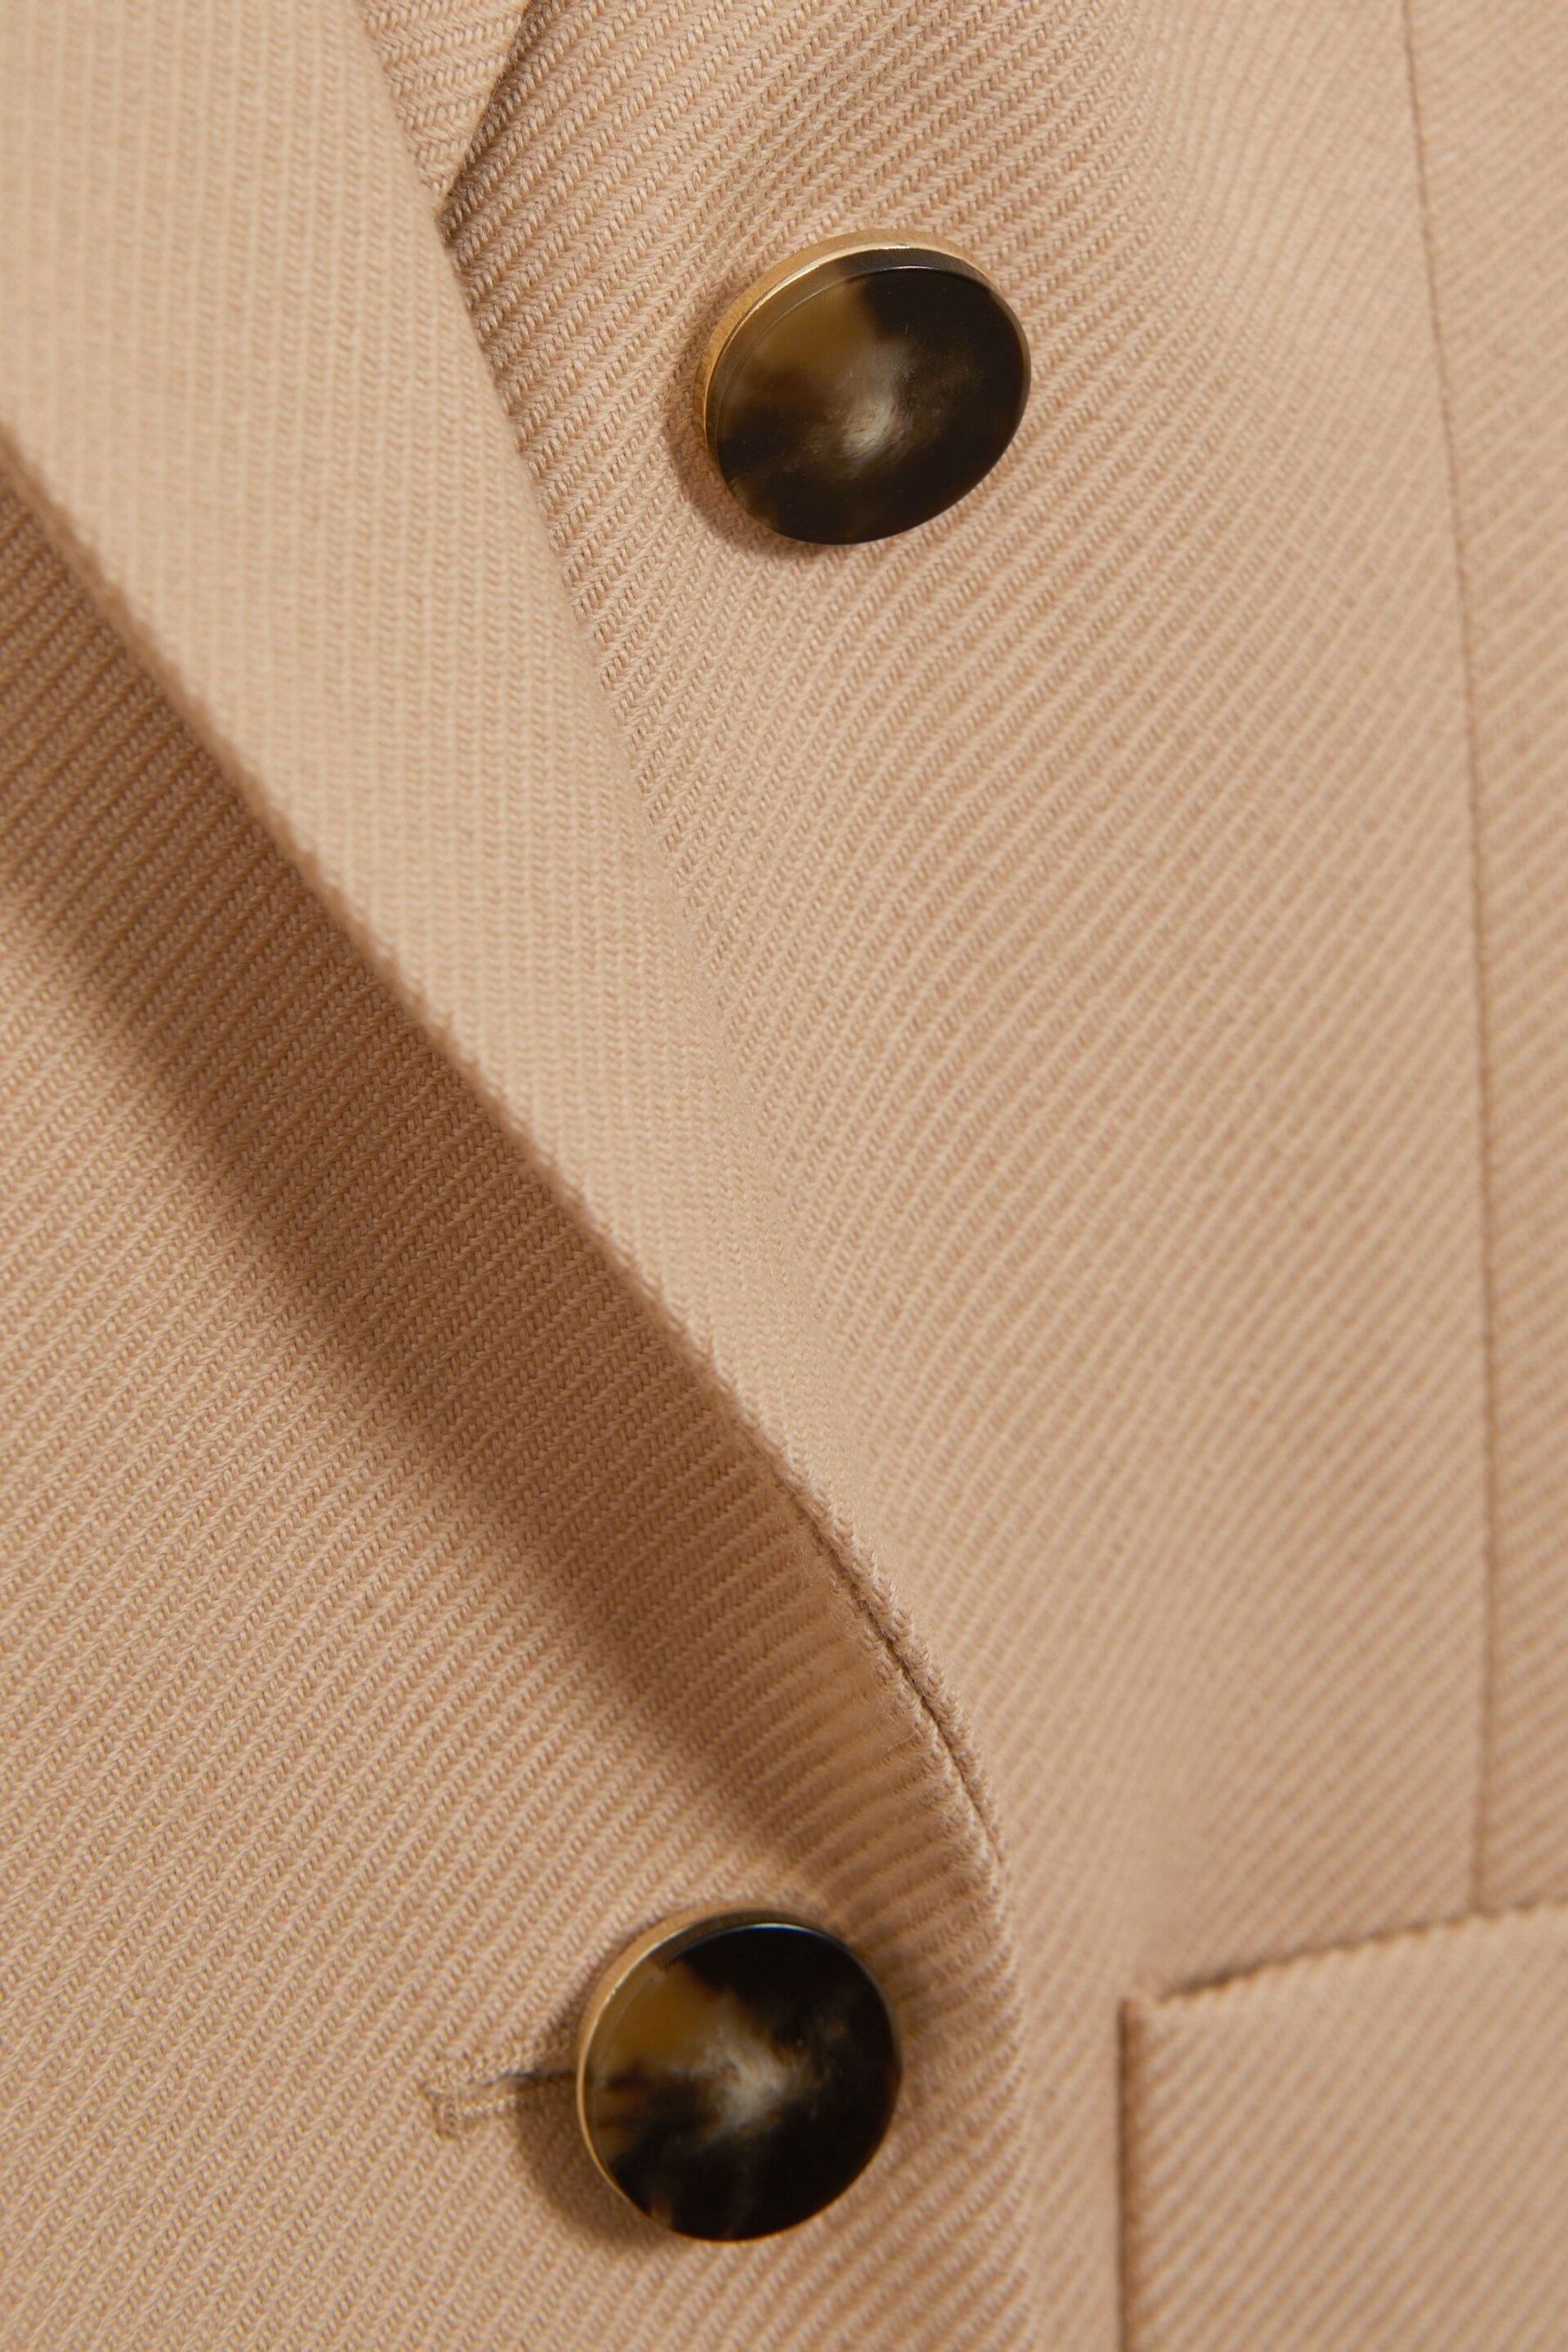 Reiss Light Camel Larsson Double Breasted Twill Blazer - Image 7 of 7